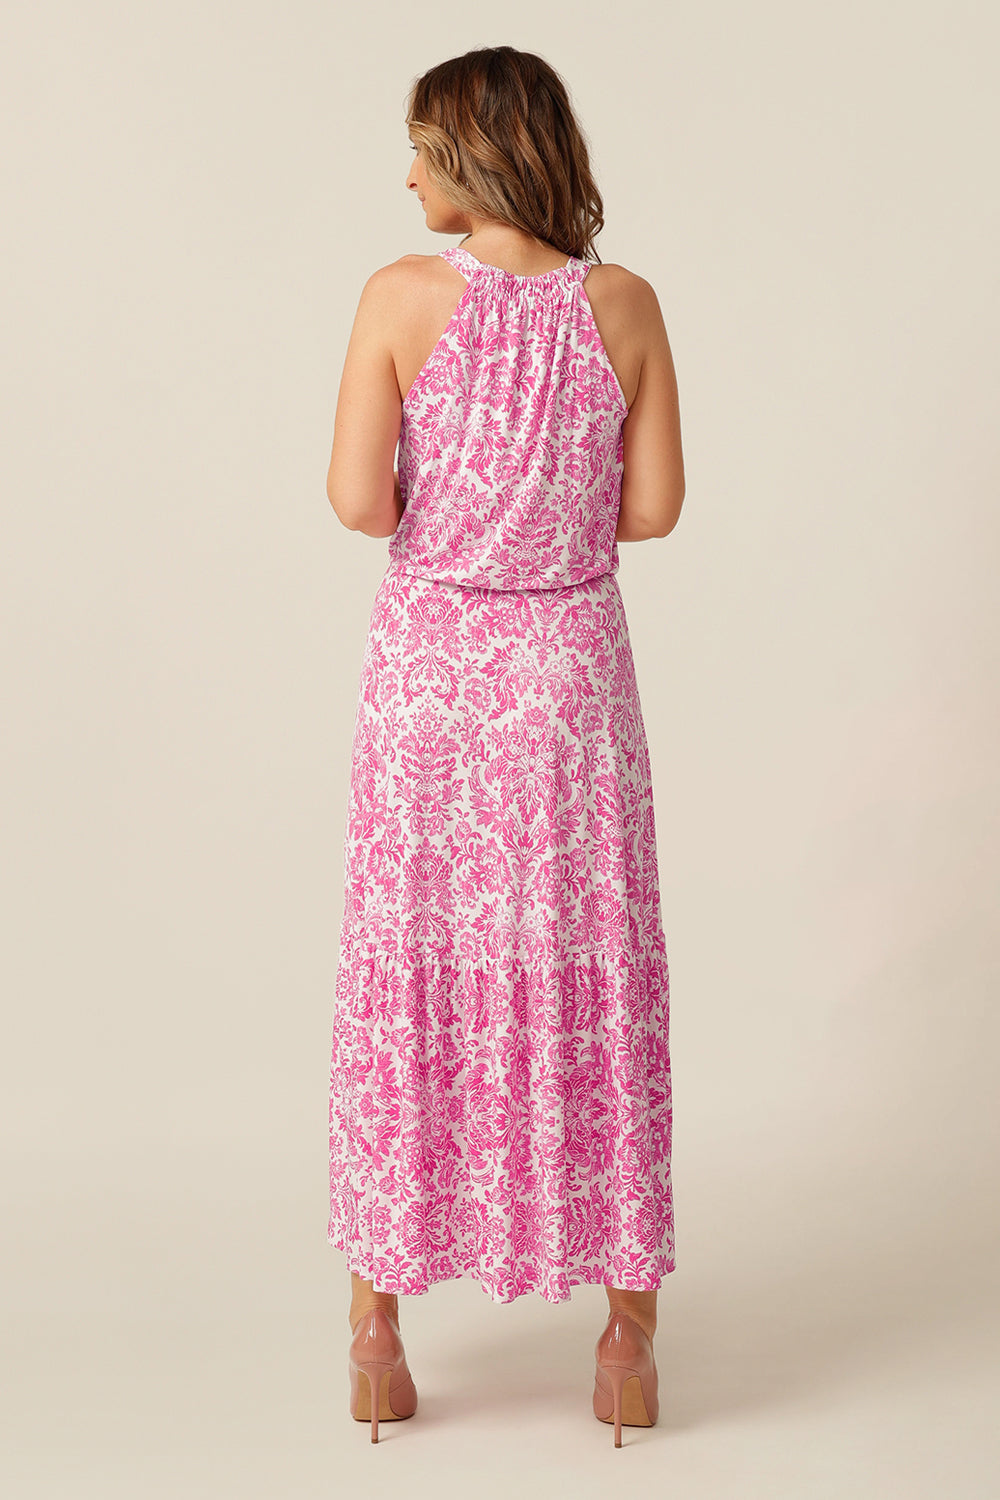 dress maxi in white and pink australia